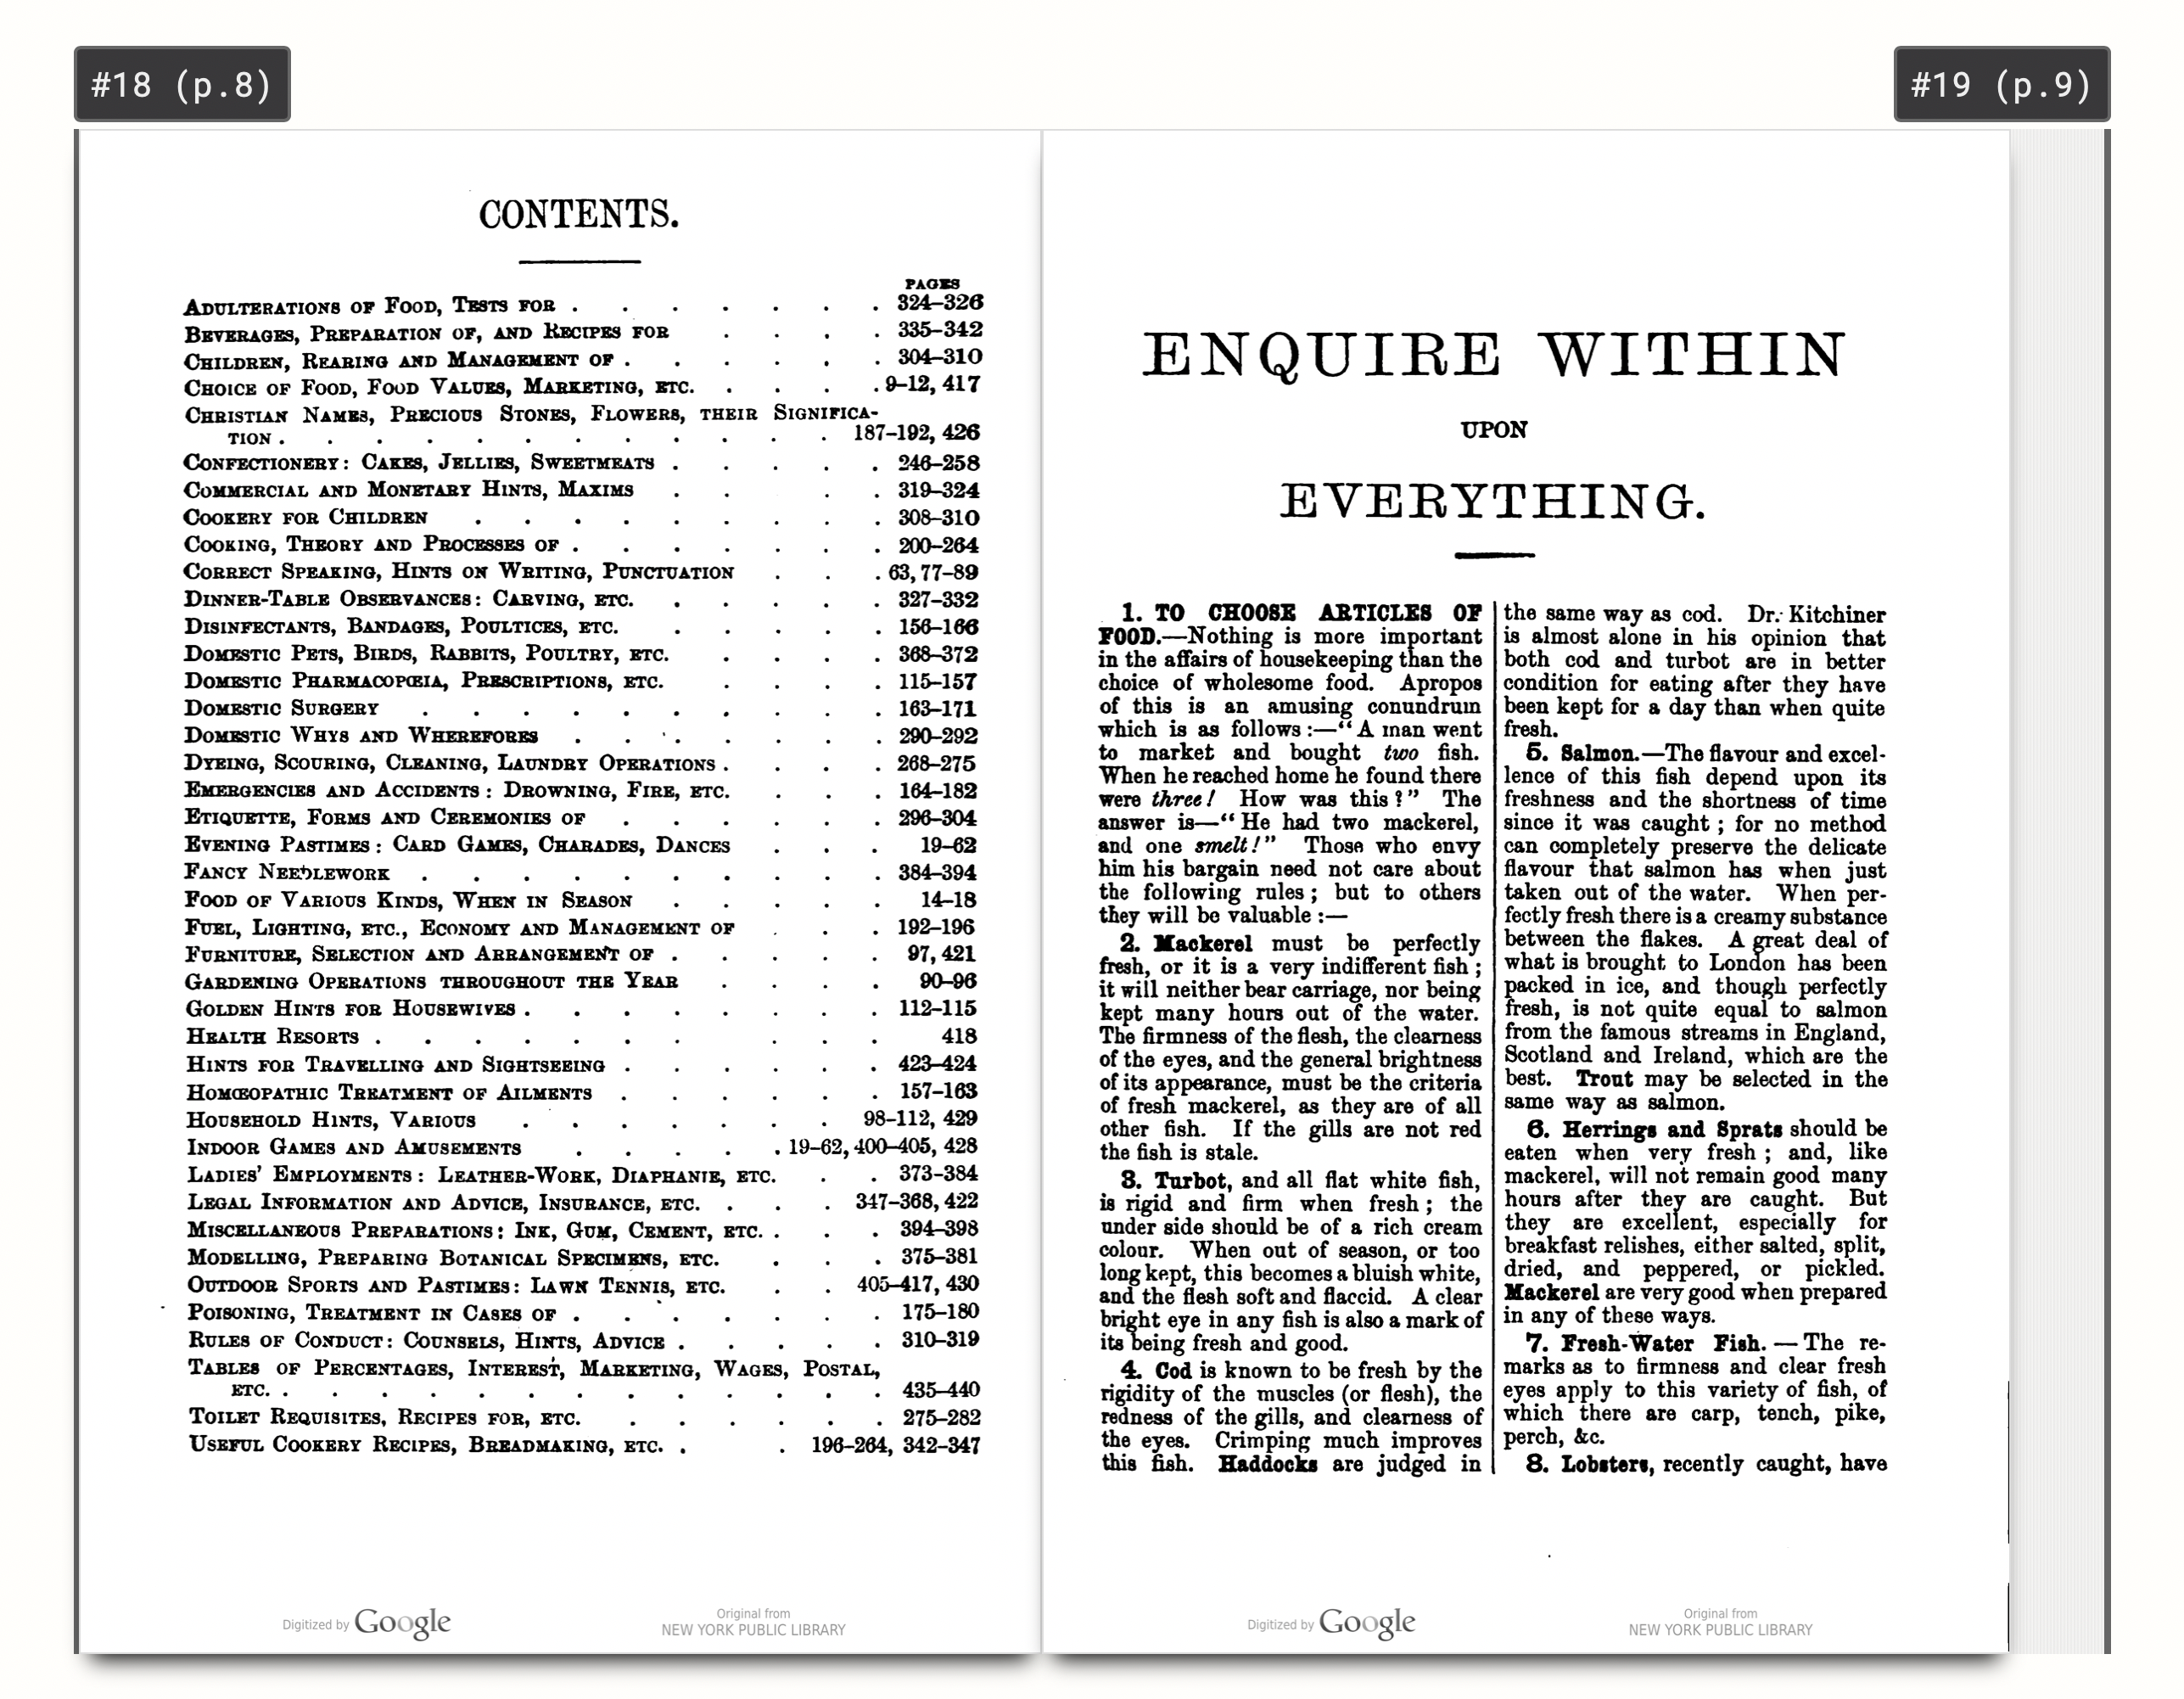 110th version, the content and first pages